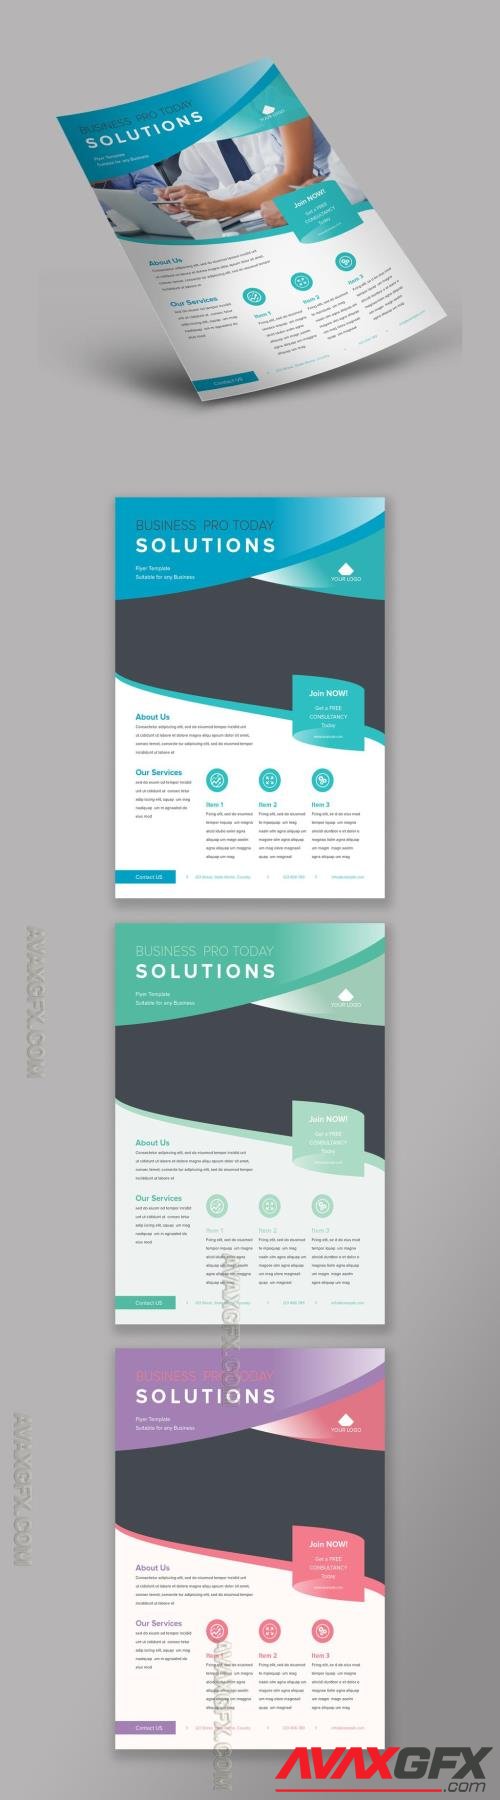 Business Flyer Layout with Gradients 218806929 [Adobestock]